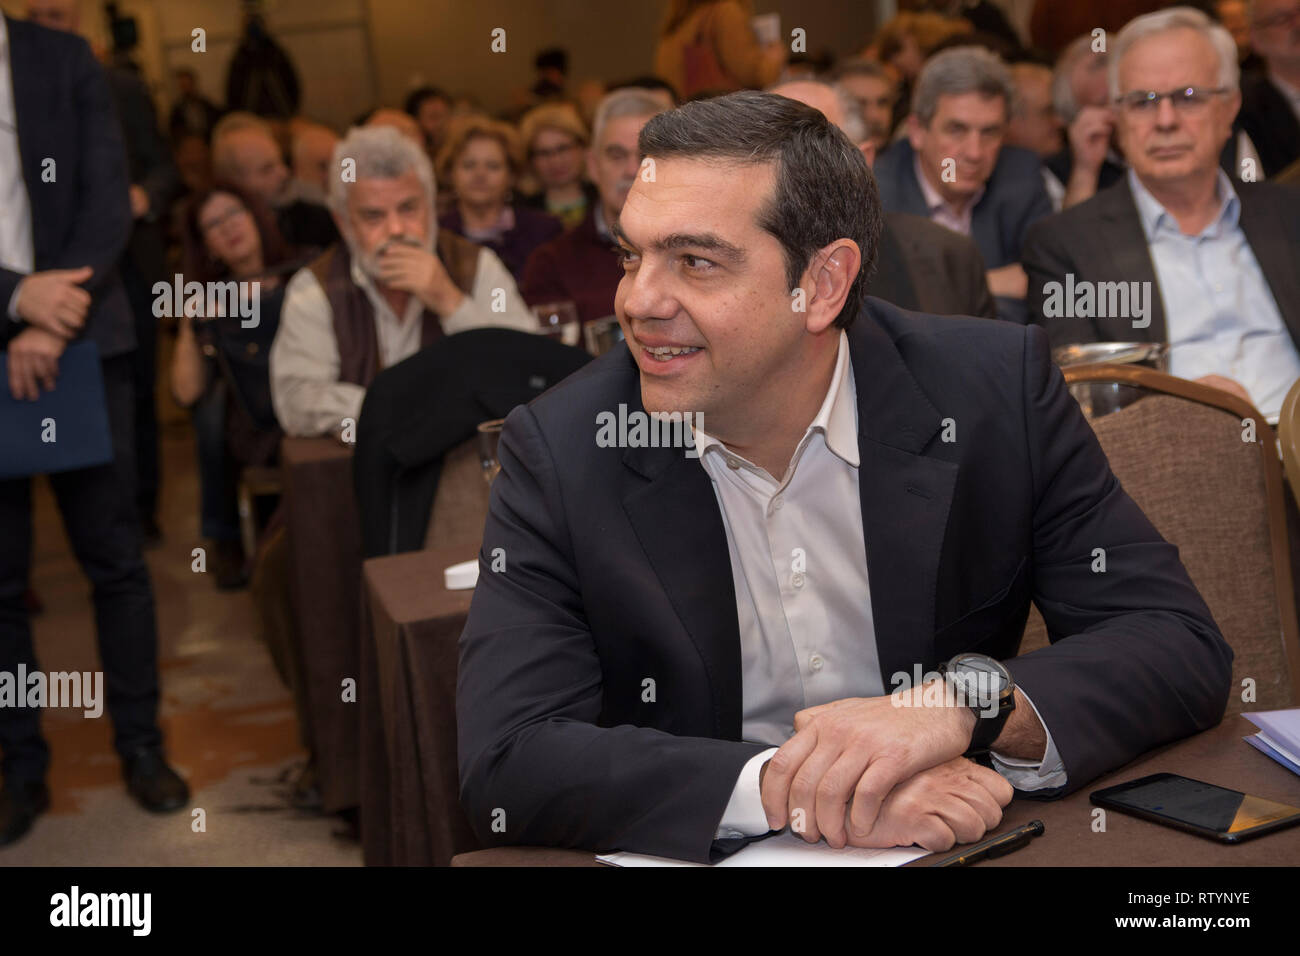 Athens, Greece. 03rd Mar, 2019. Greek prime-minister and SYRIZA leader, ALEXIS TSIPRAS, attends the party’s central committee meeting. SYRIZA's Central Committee, the highest decision making organ of the party, assembled in order to prepare for the forthcoming European Parliament 2019 elections.© Nikolas Georgiou / Alamy Live News Credit: Nikolas Georgiou/Alamy Live News Stock Photo